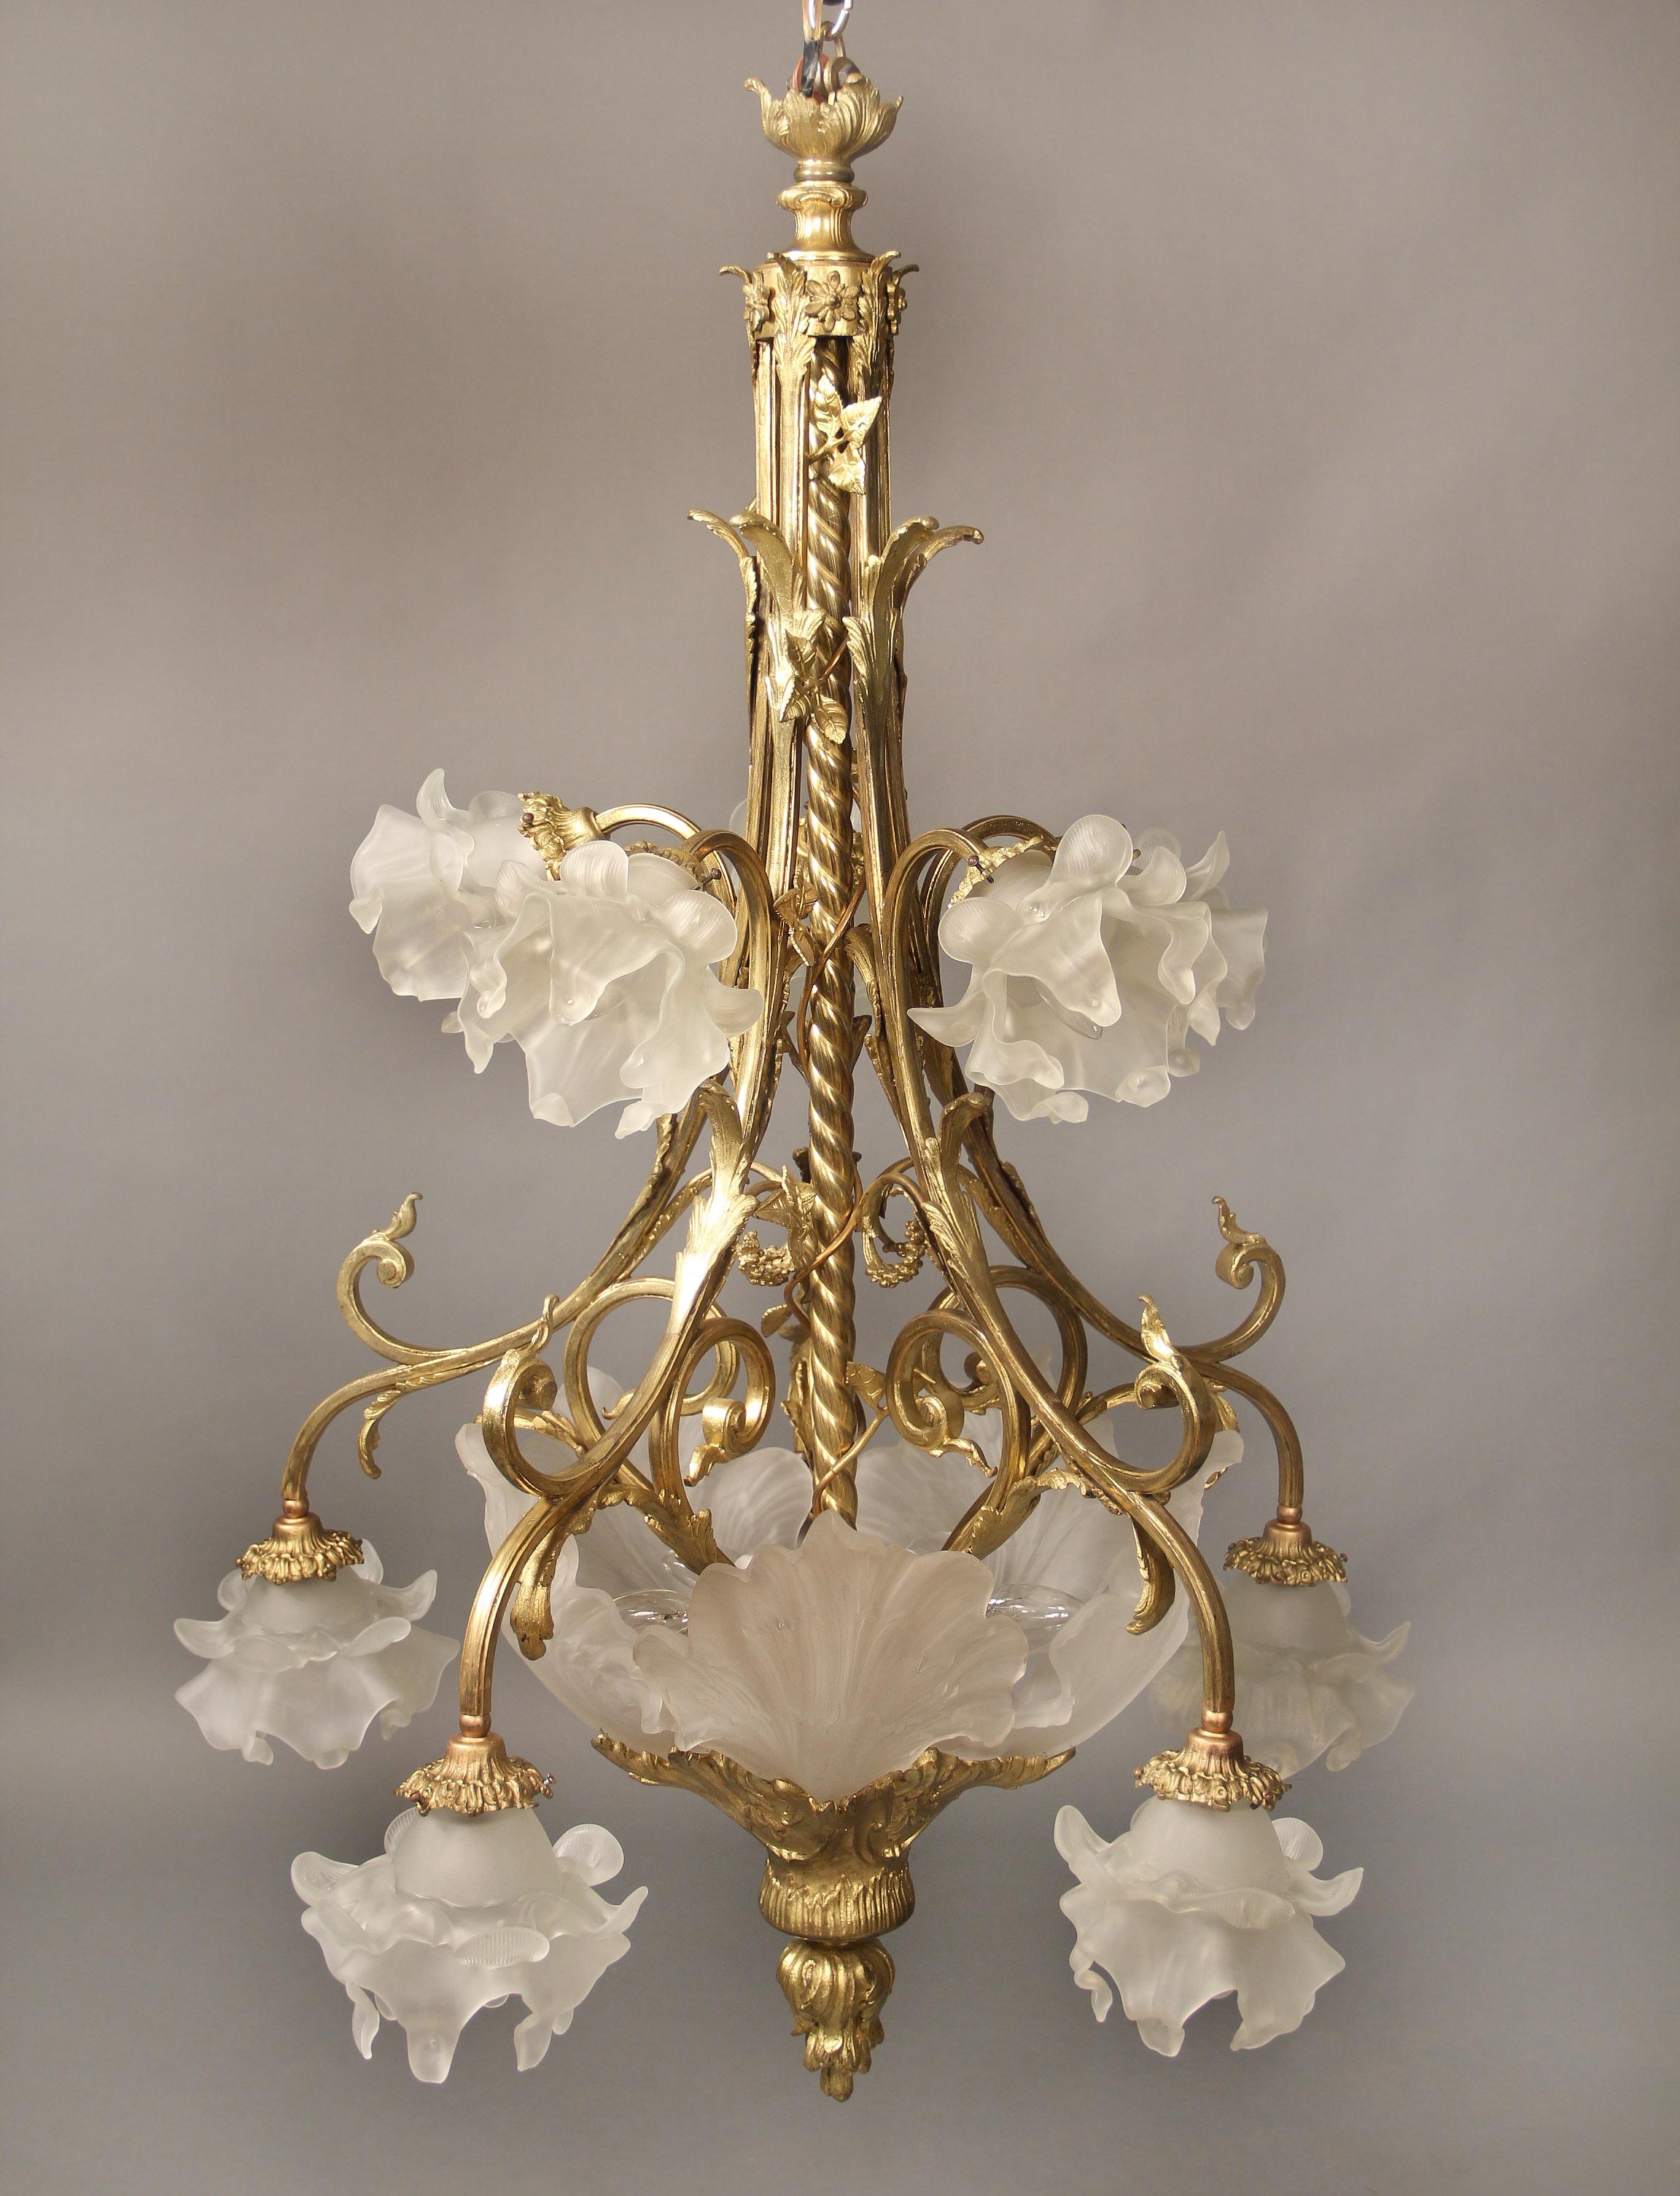 A nice late 19th century gilt bronze fifteen light chandelier

Bronze floral frame designed with a twisted rope running down the center, the bottom surrounded with frosted shell shaped shades with a flame tip base, ten tiered perimeter lights with